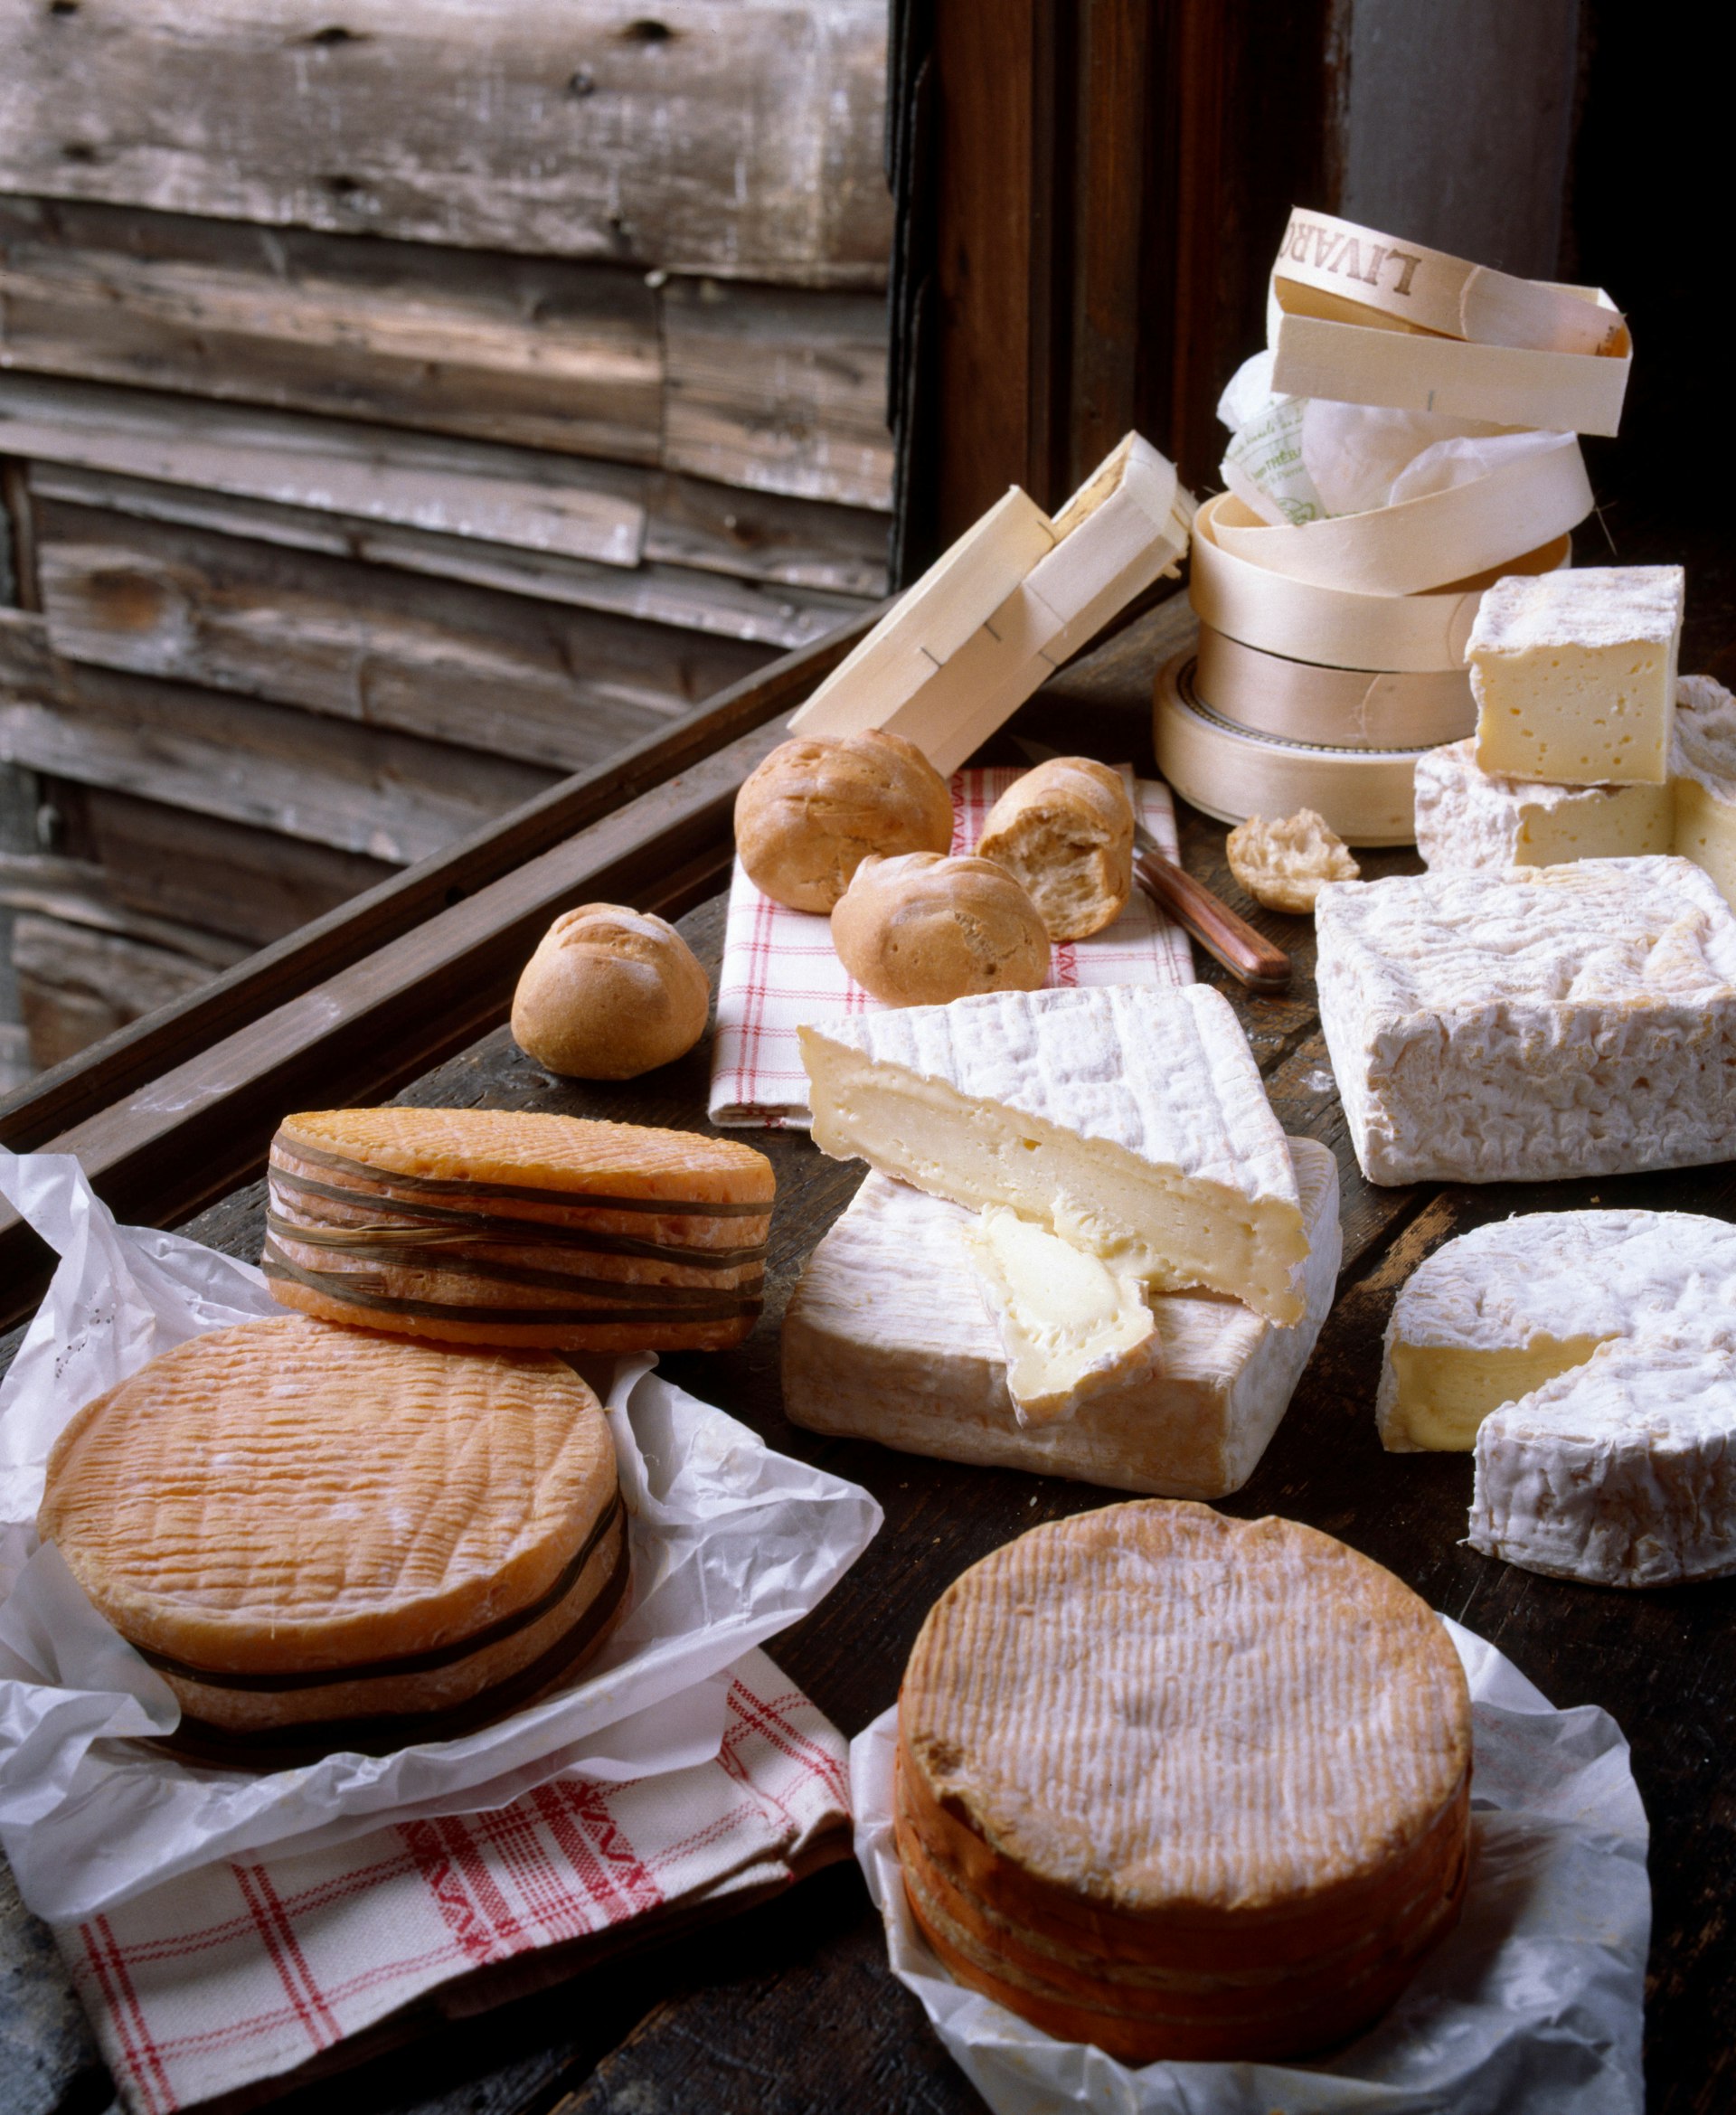 A selection of French cheeses : Livarot ,Pont-l'eveque and Pave d'auge